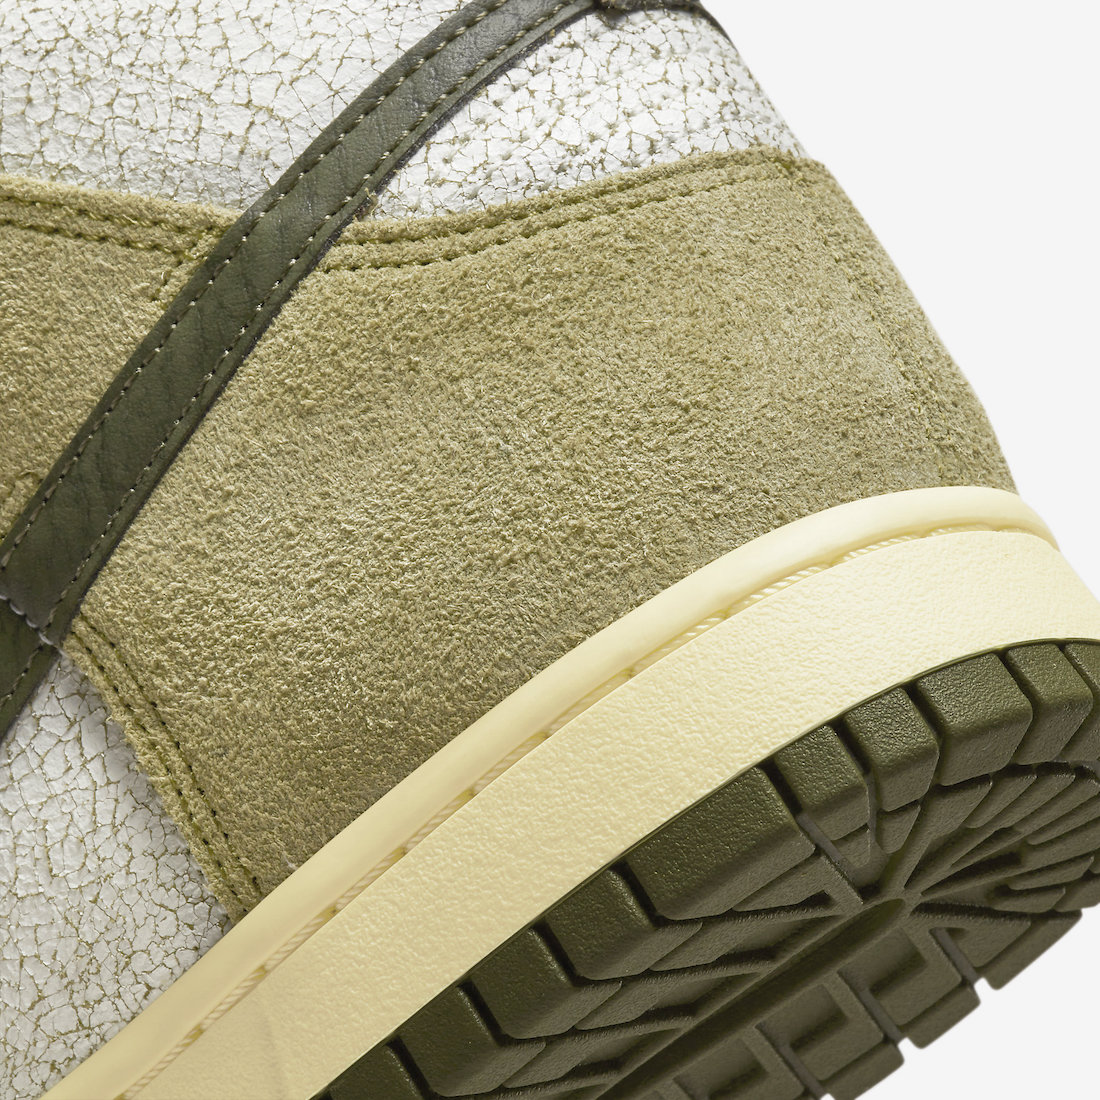 Nike Dunk High Re-Raw DO6713-300 Release Date